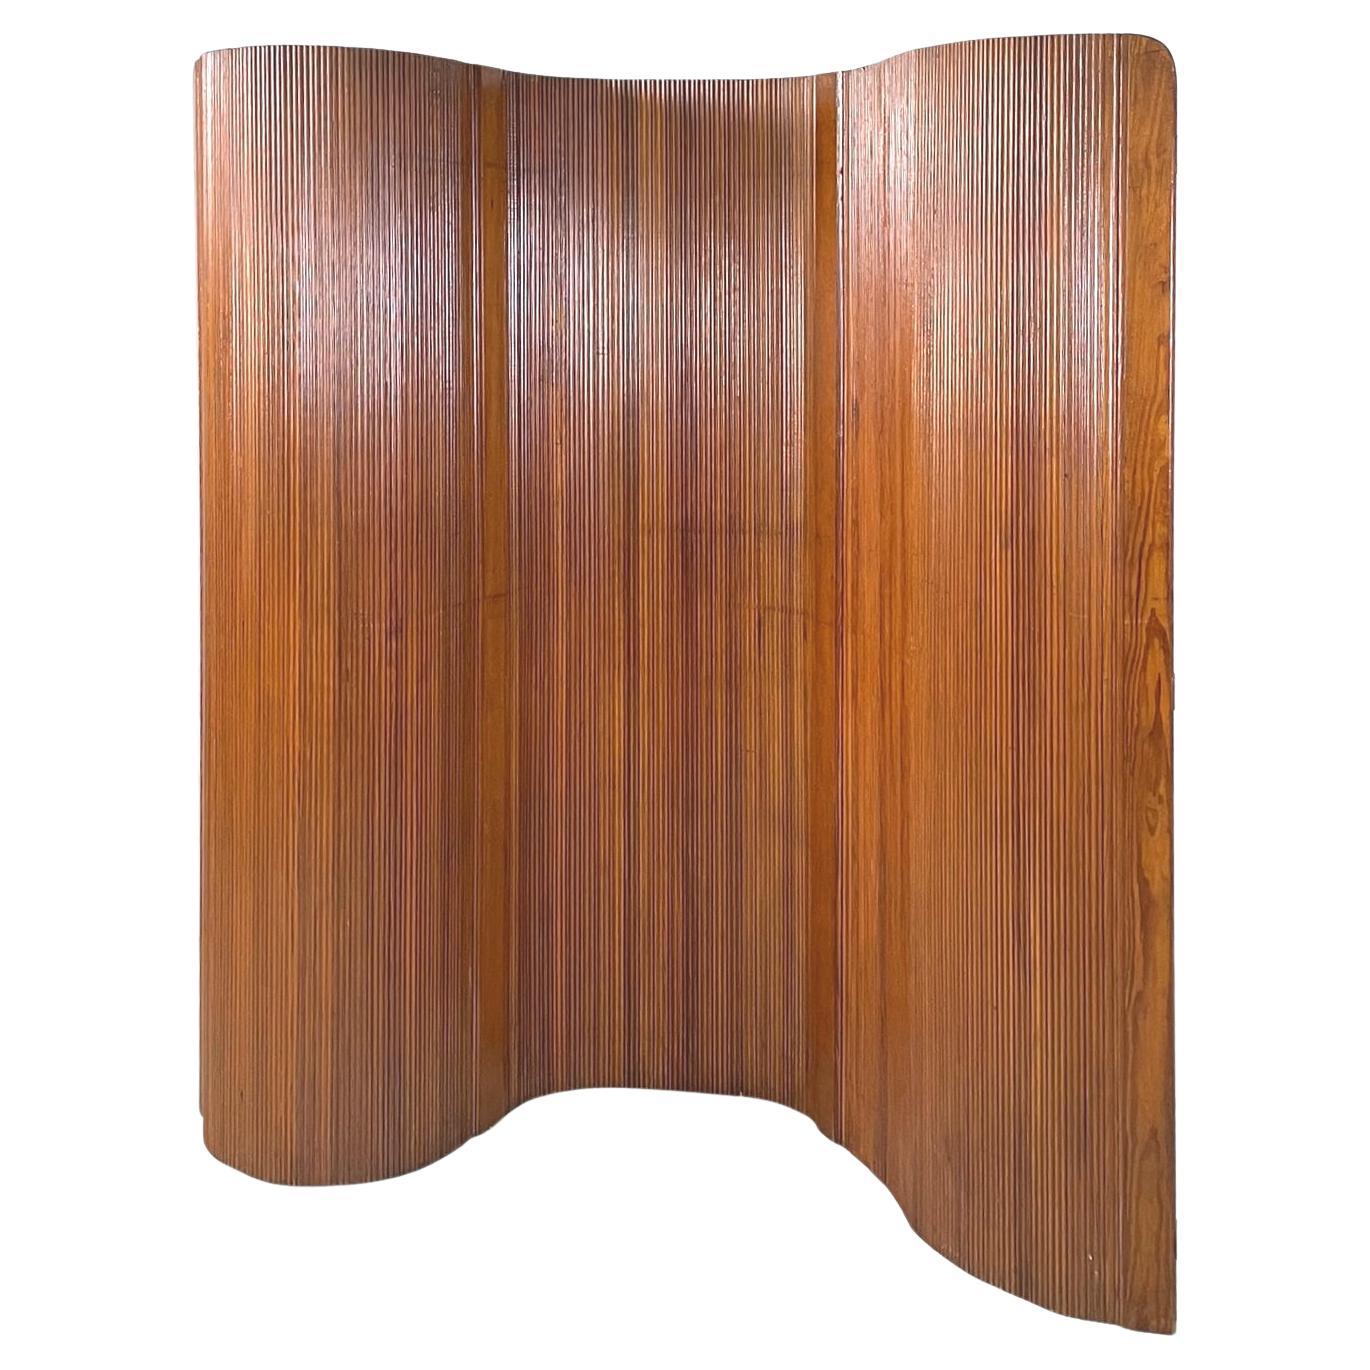 French Midcentury Art Deco Self-Supporting Wooden Screen by Baumann, 1950s